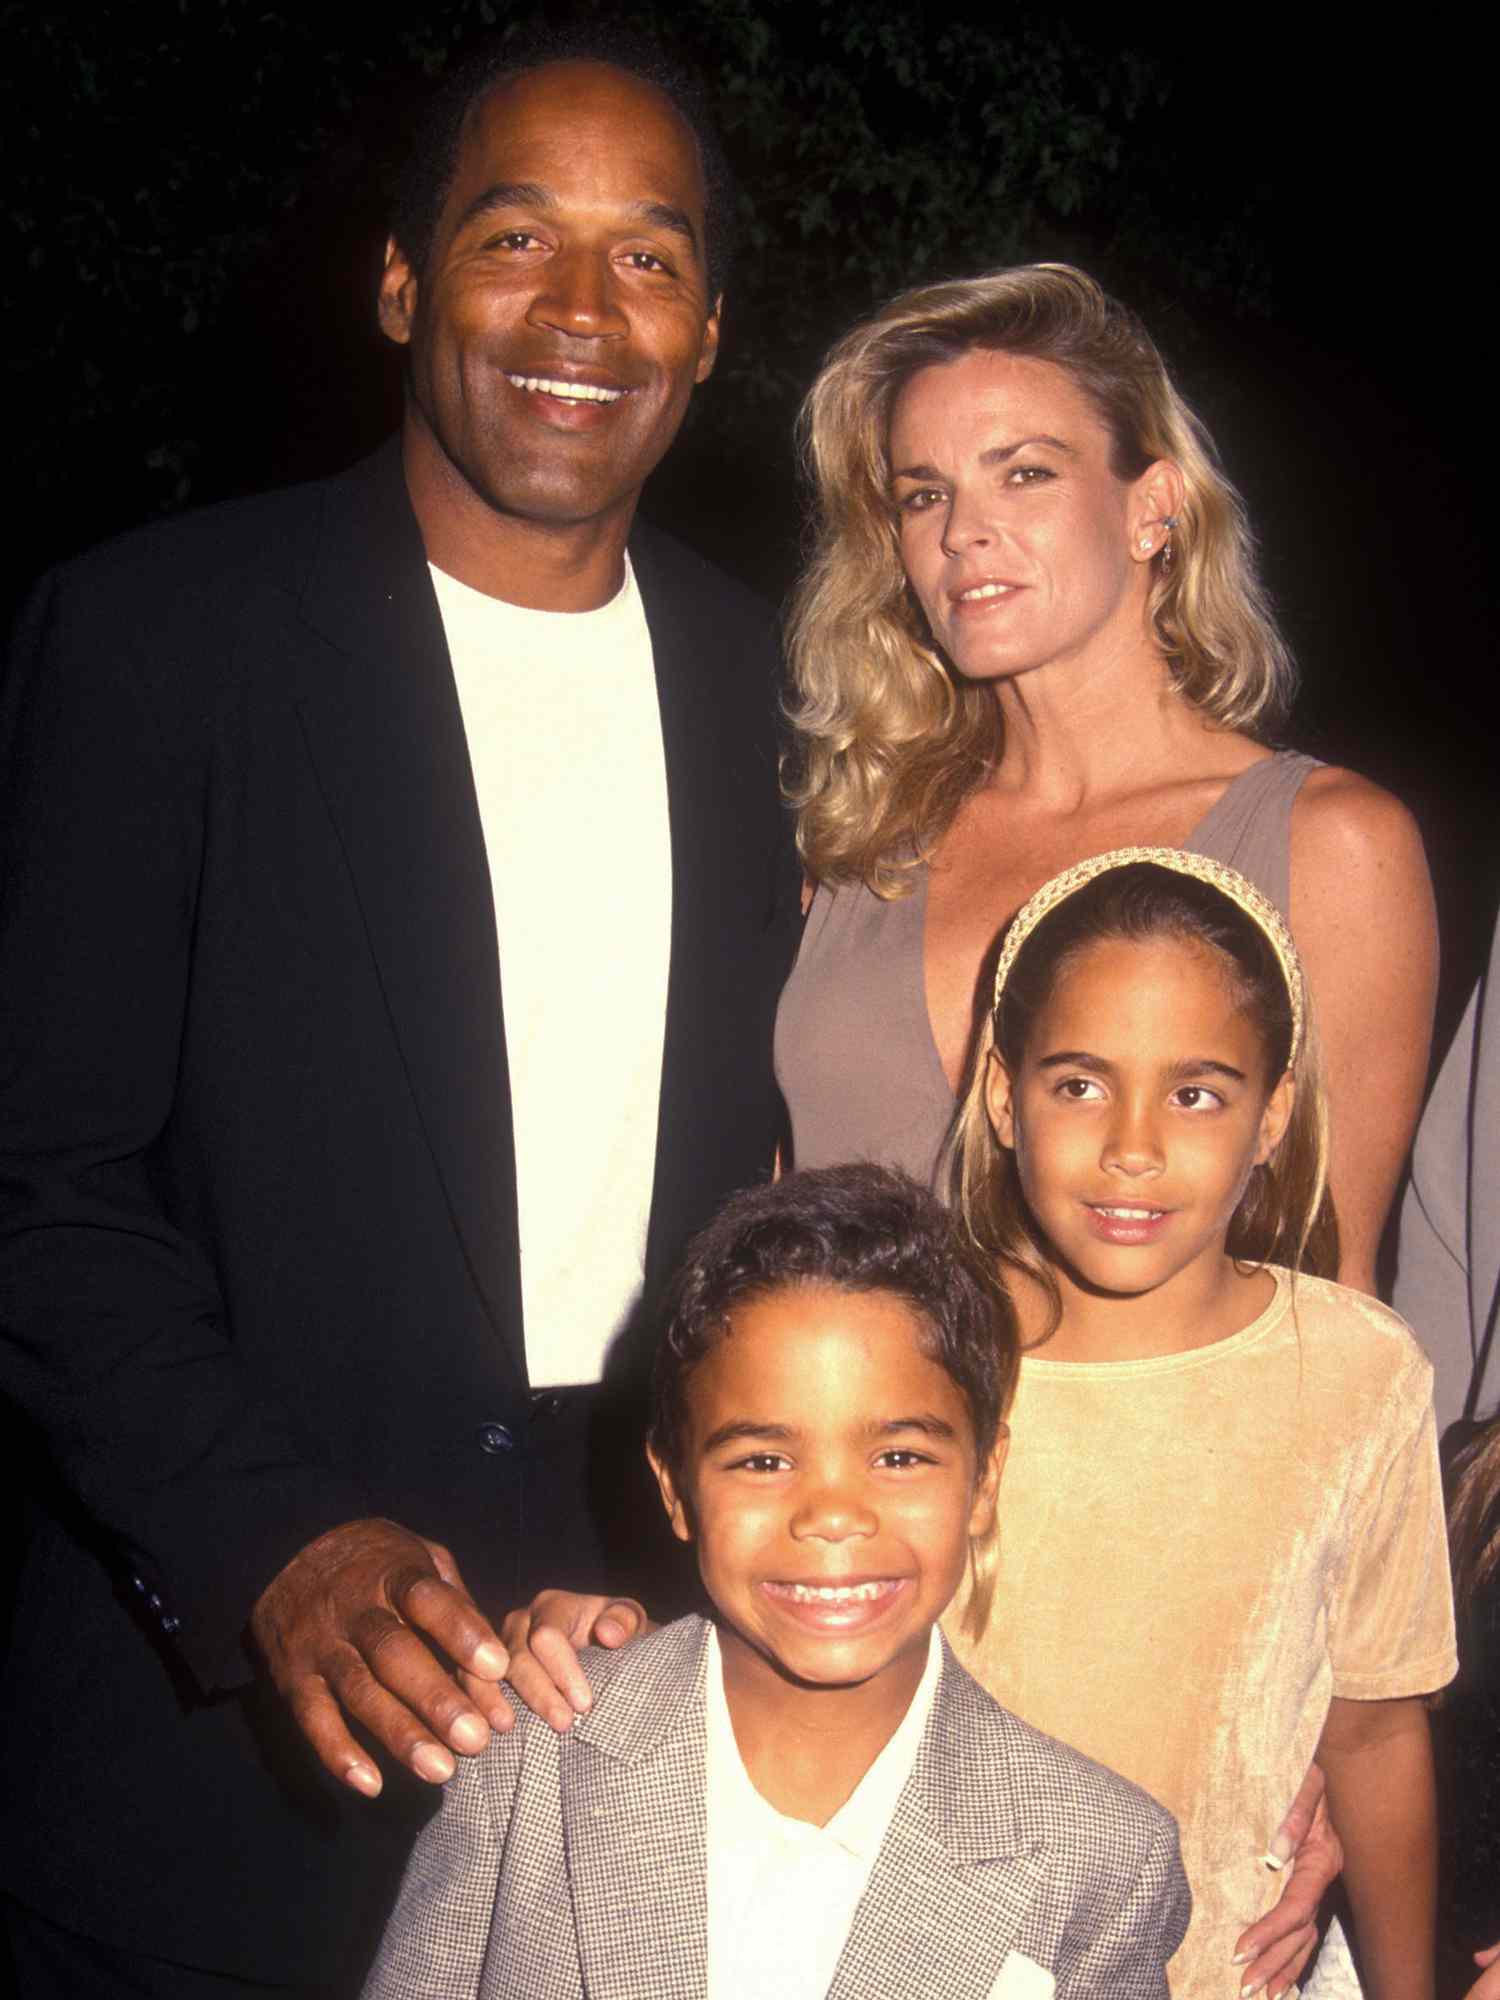 O.J. Simpson, Nicole Brown Simpson, and their kids Sydney and Justin at the 'Naked Gun 33 1/3' Premiere in Hollywood, California. 